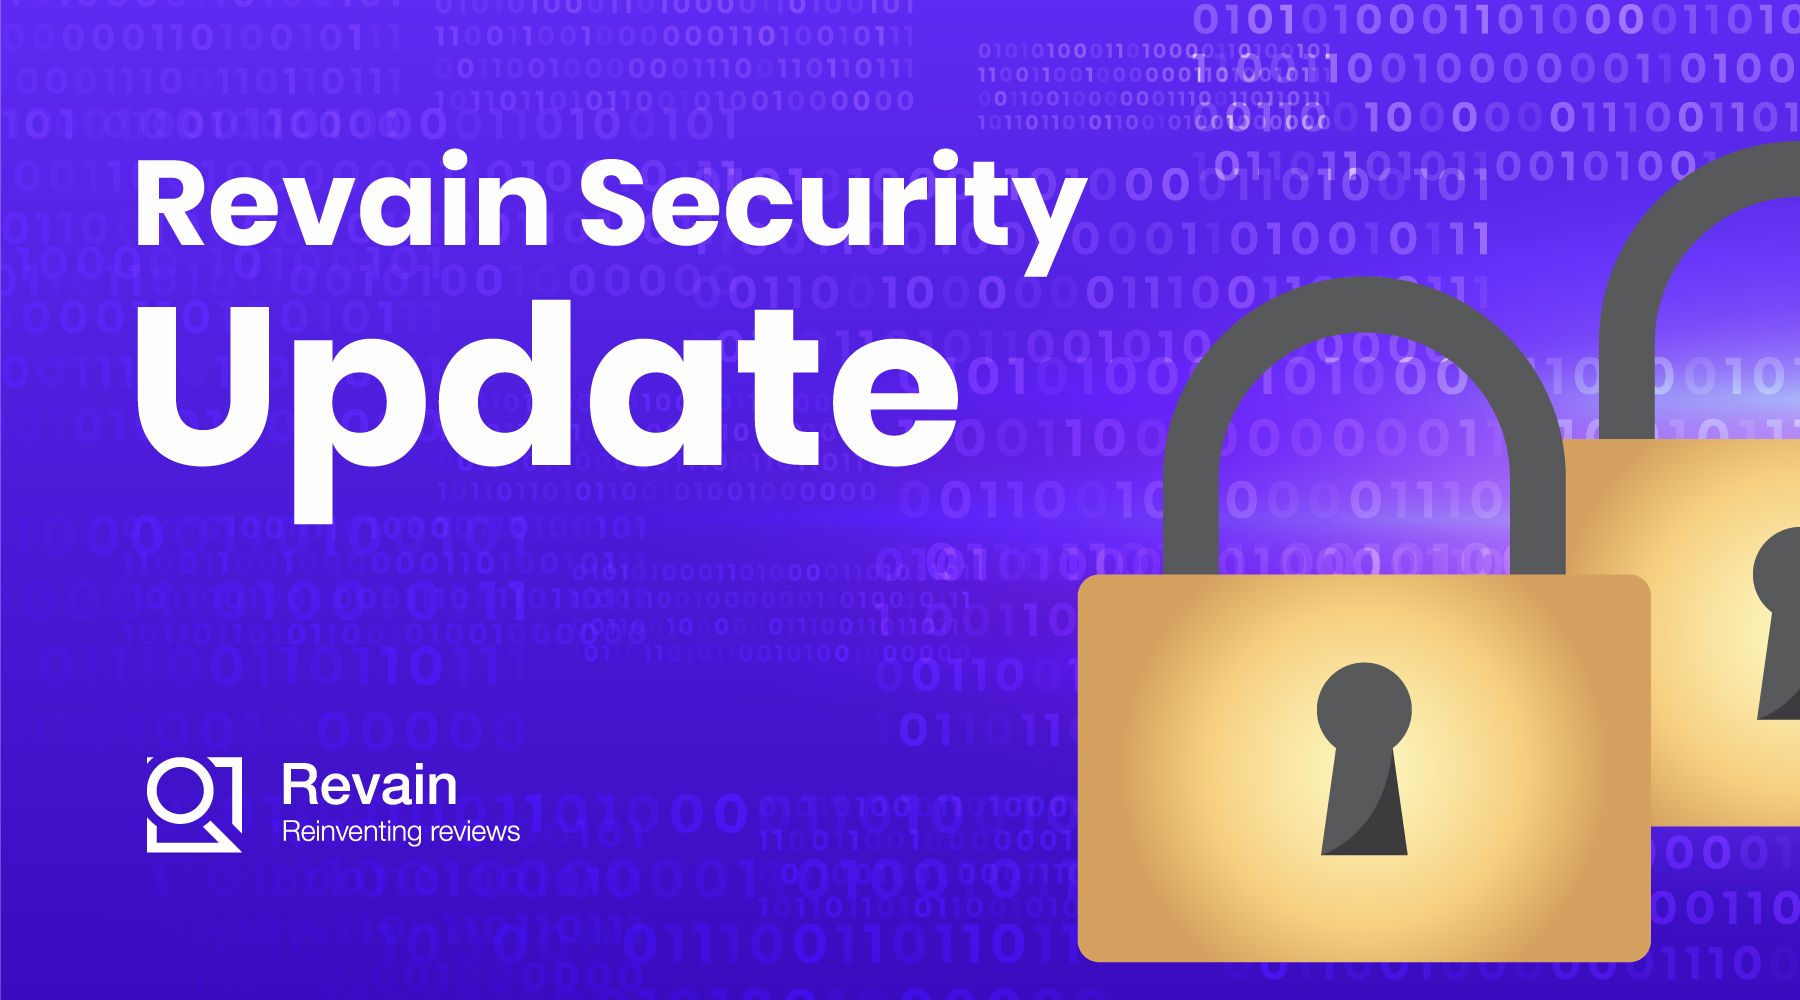 The security update is here!